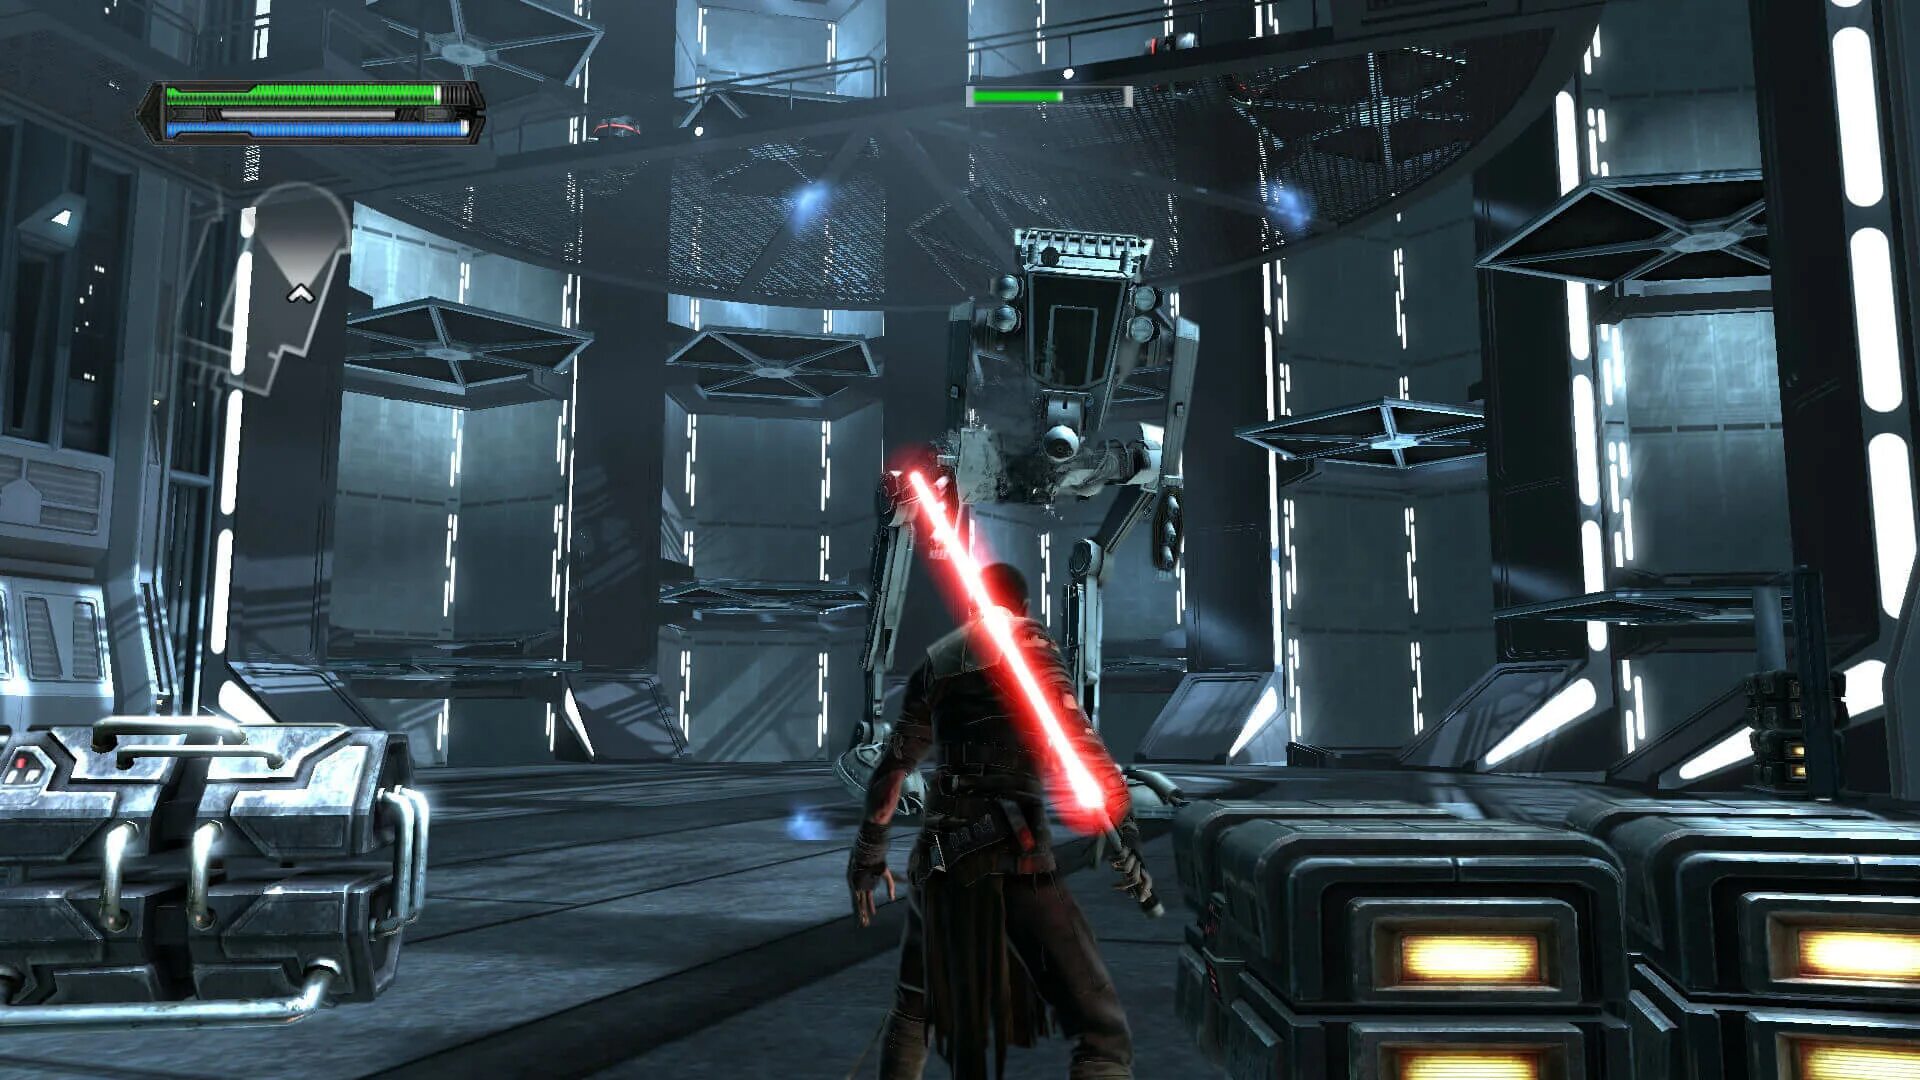 Игры звездная мода. Игра Star Wars unleashed 3. Star Wars: the Force unleashed. Star Wars: the Force unleashed - Ultimate Sith Edition. Star Wars the Force unleashed 1.